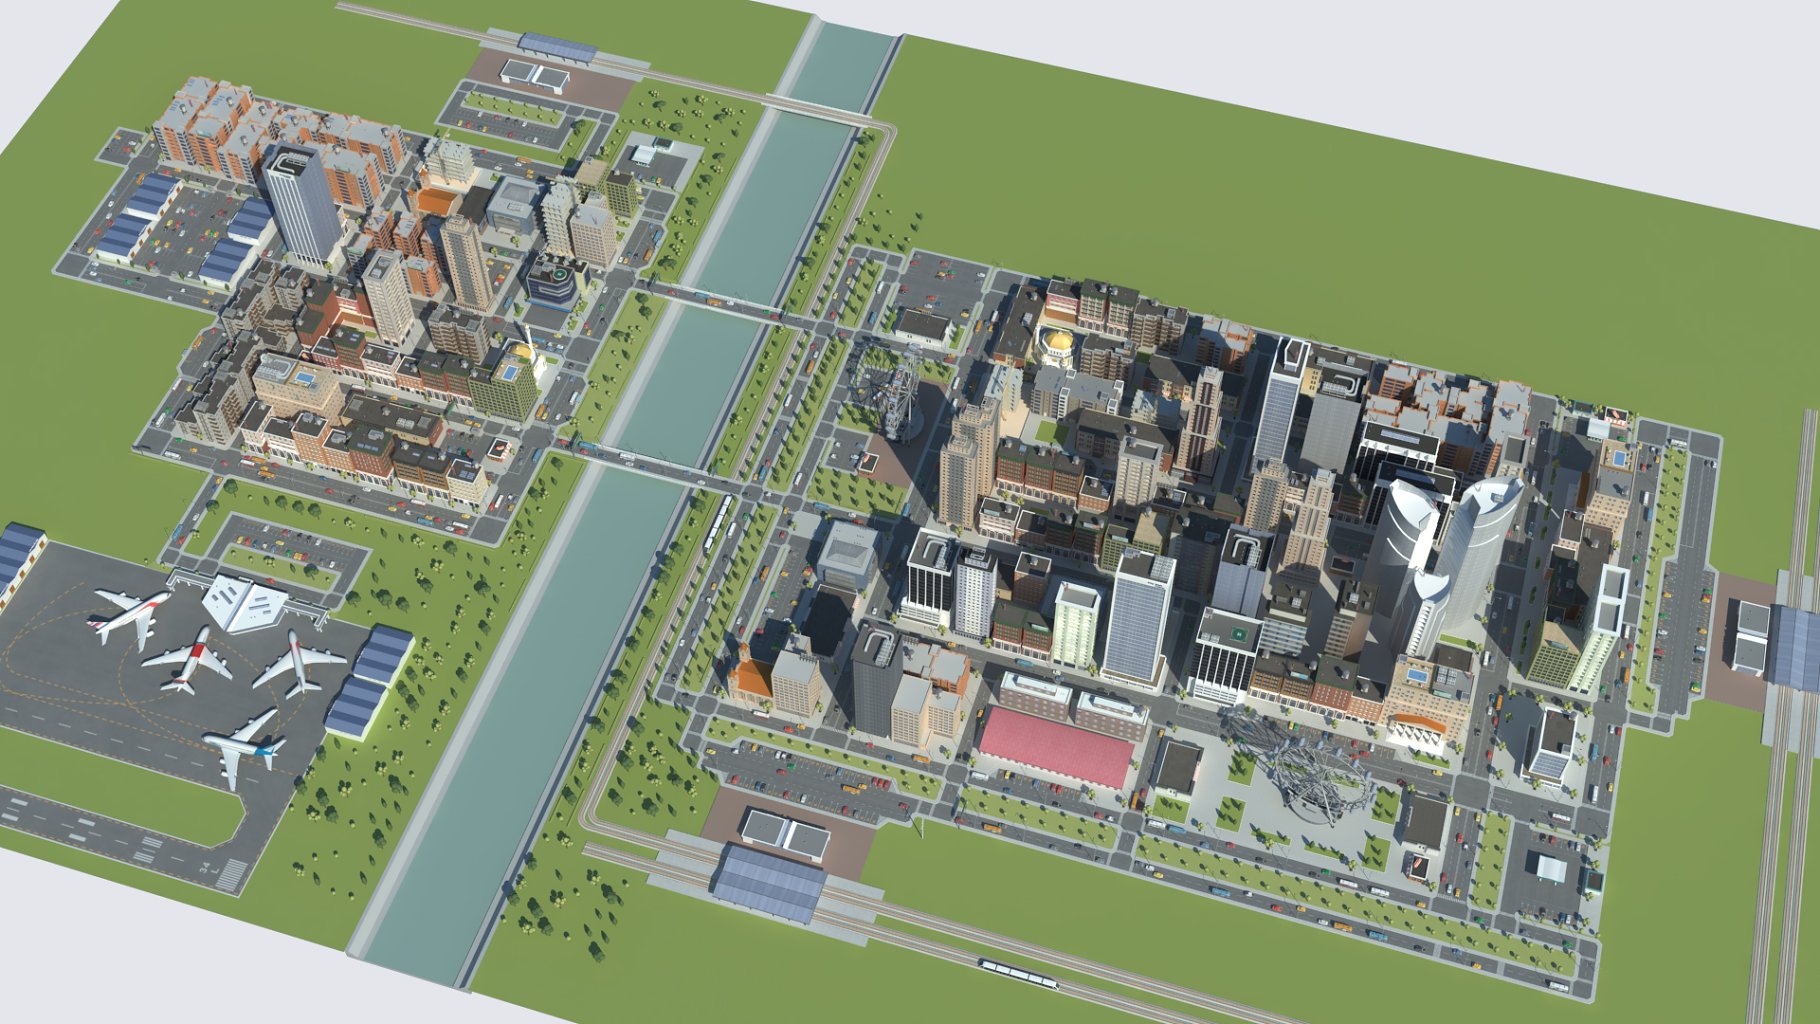 Rendering of a wonderful low-poly 3d model of the city